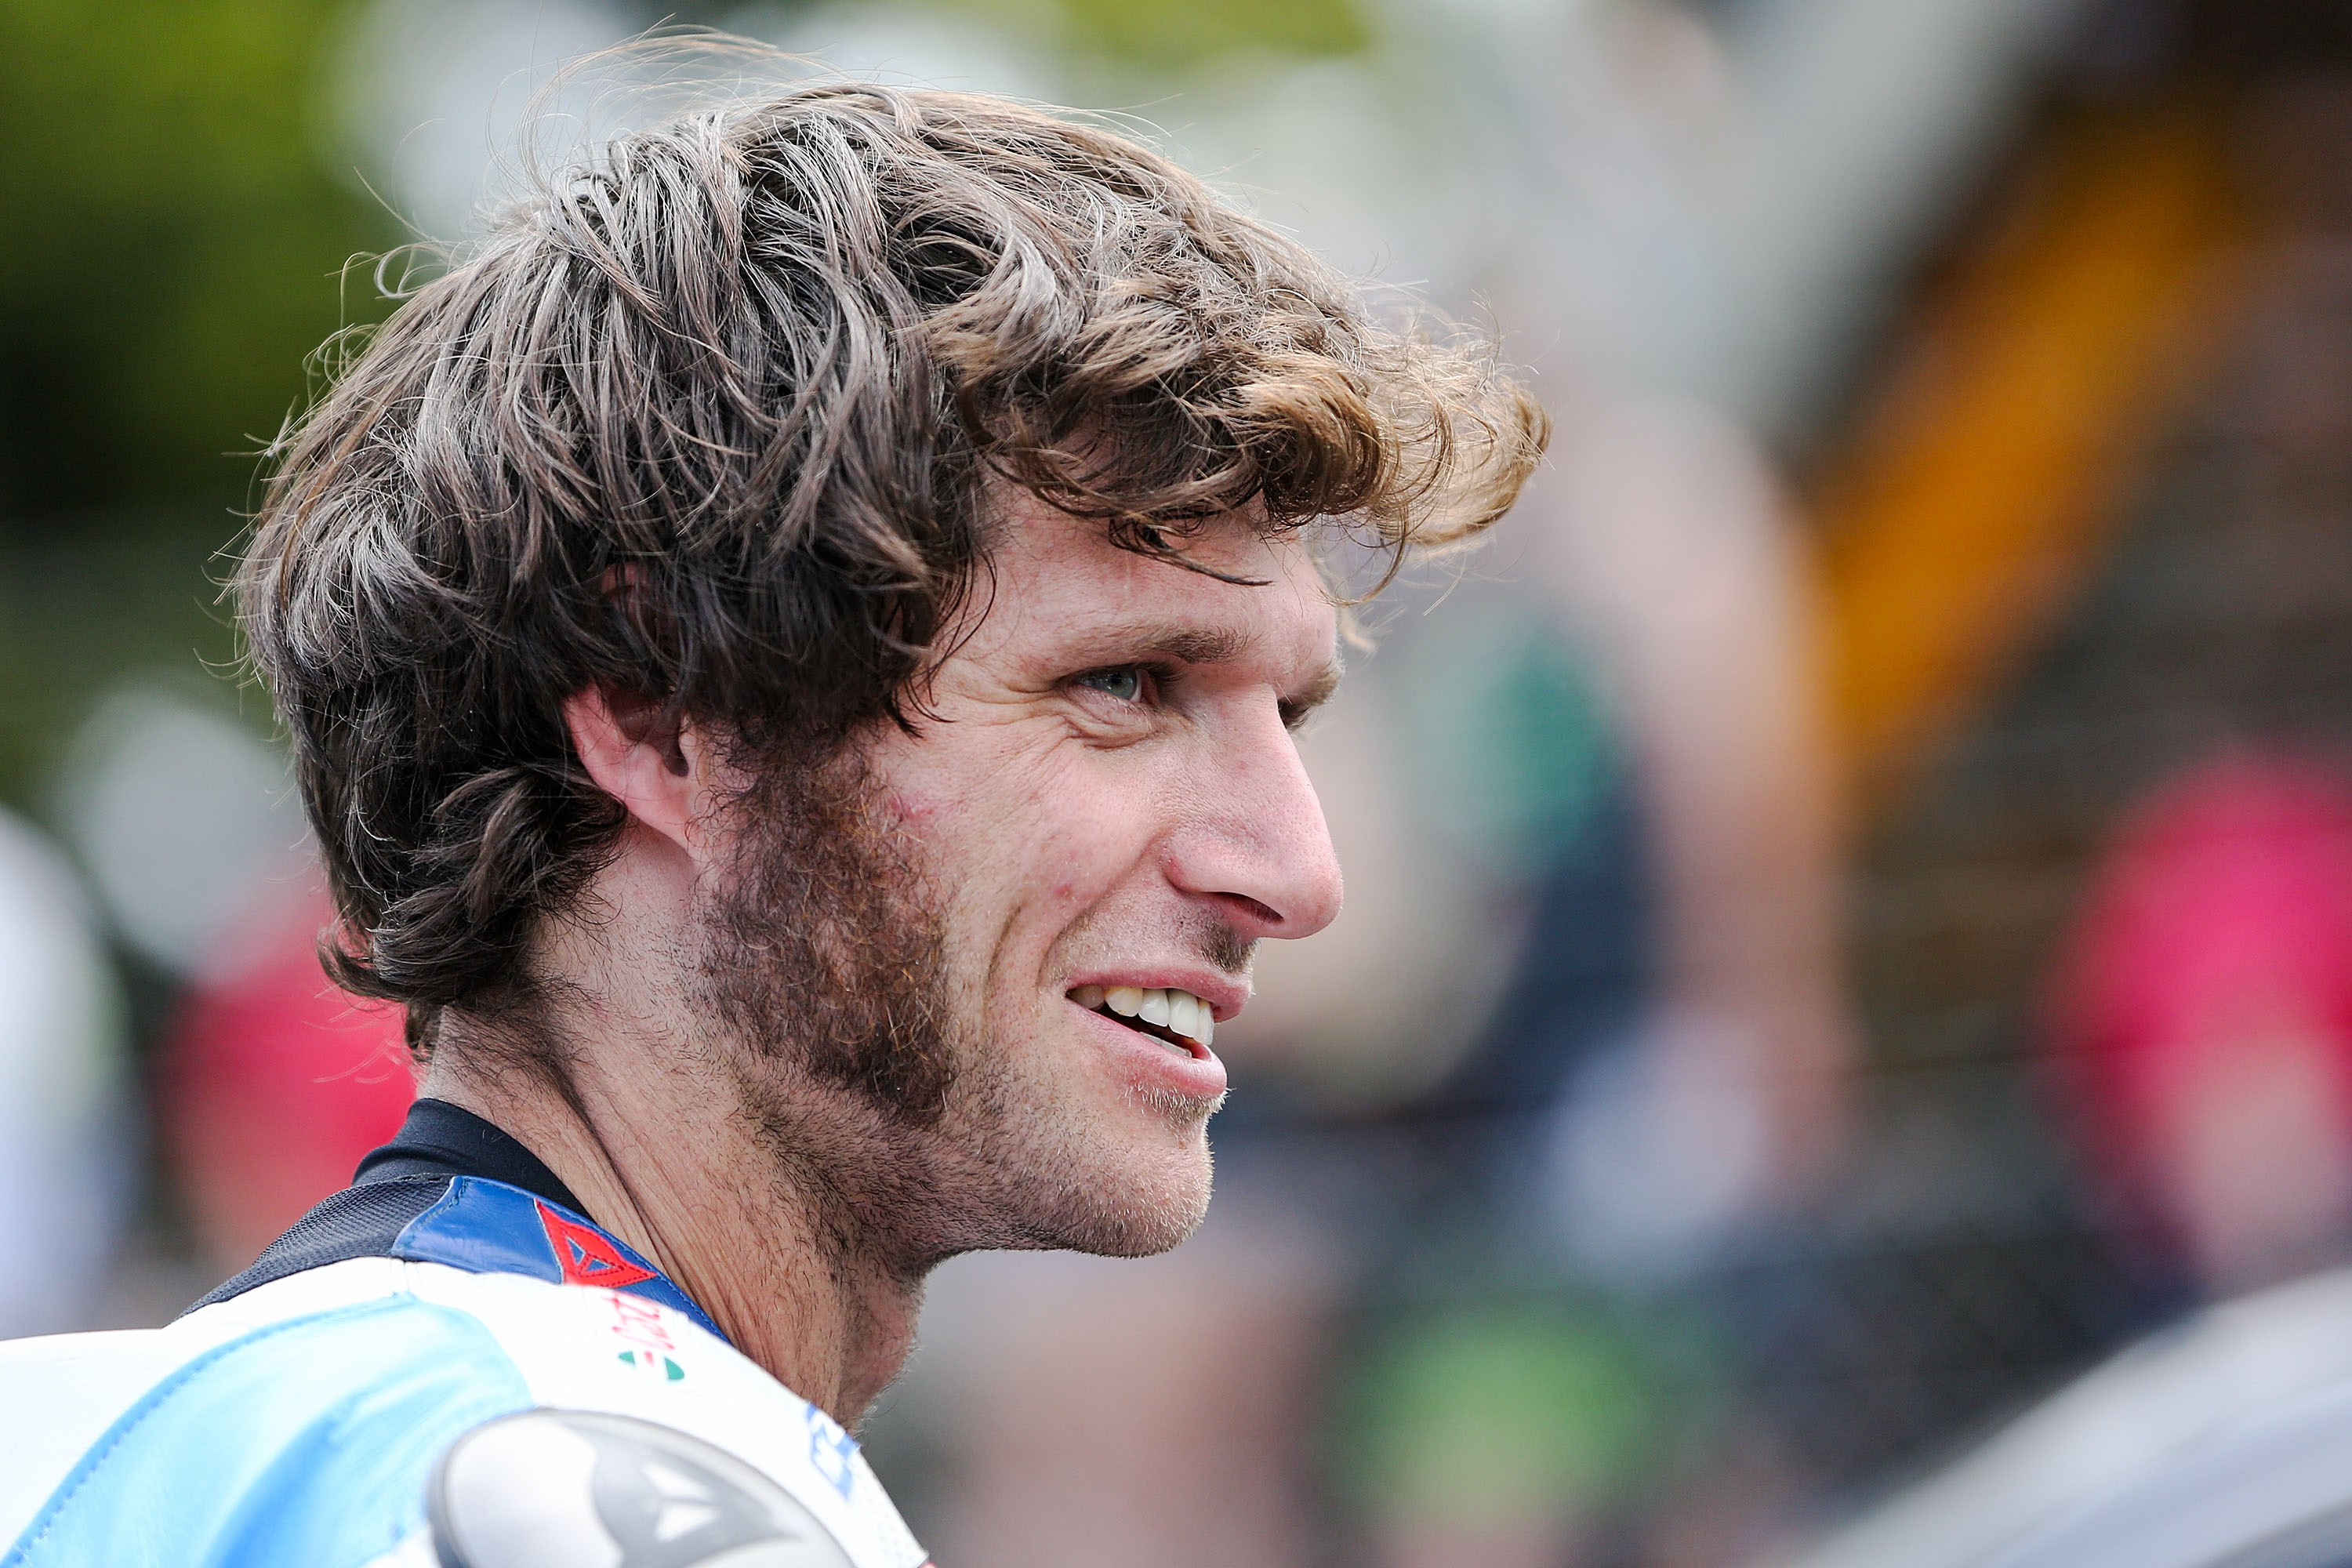 Guy Martin to ride for Smiths Triumph at TT 2015